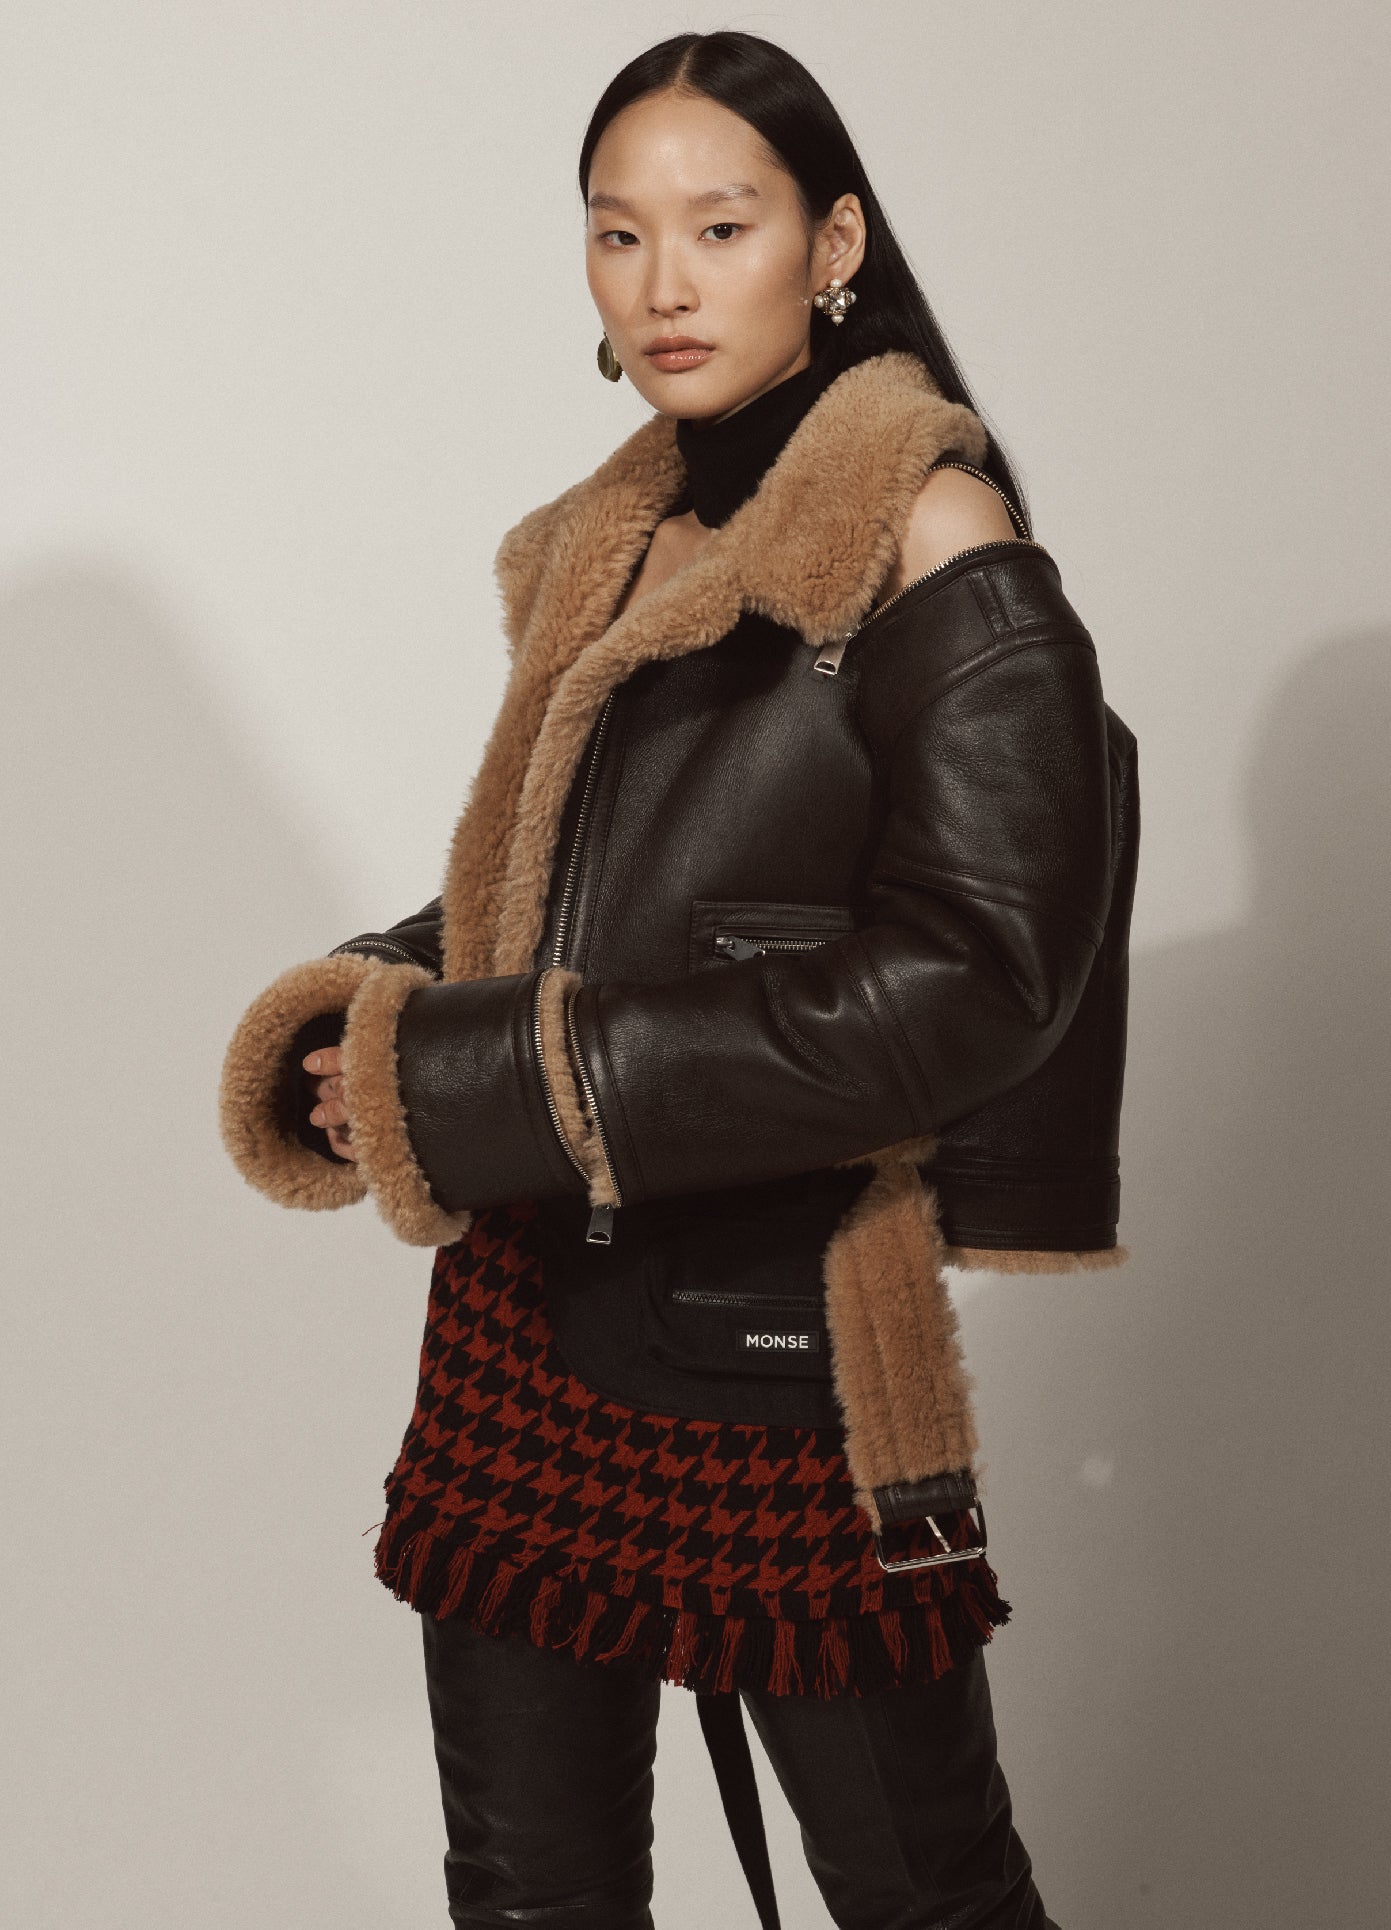 MONSE Shearling Jacket in Dark Brown and Ivory on Model Lookbook Side View